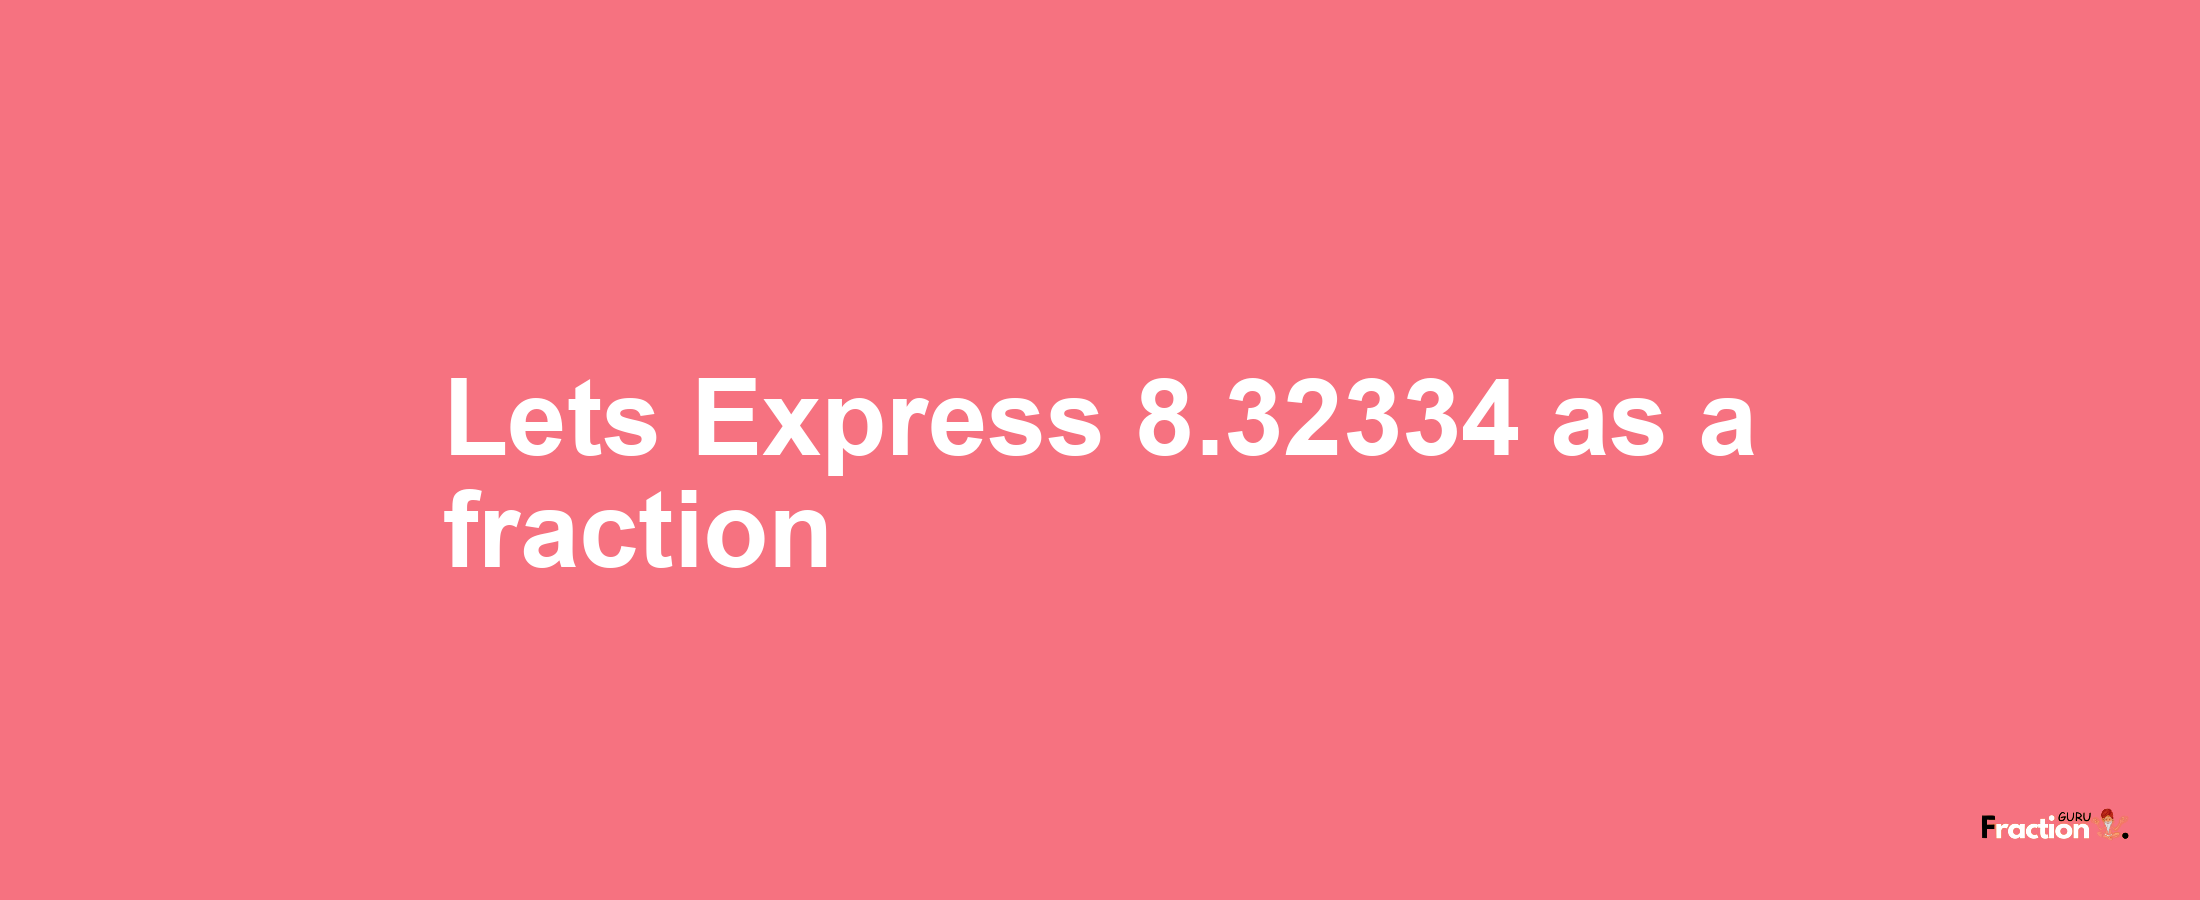 Lets Express 8.32334 as afraction